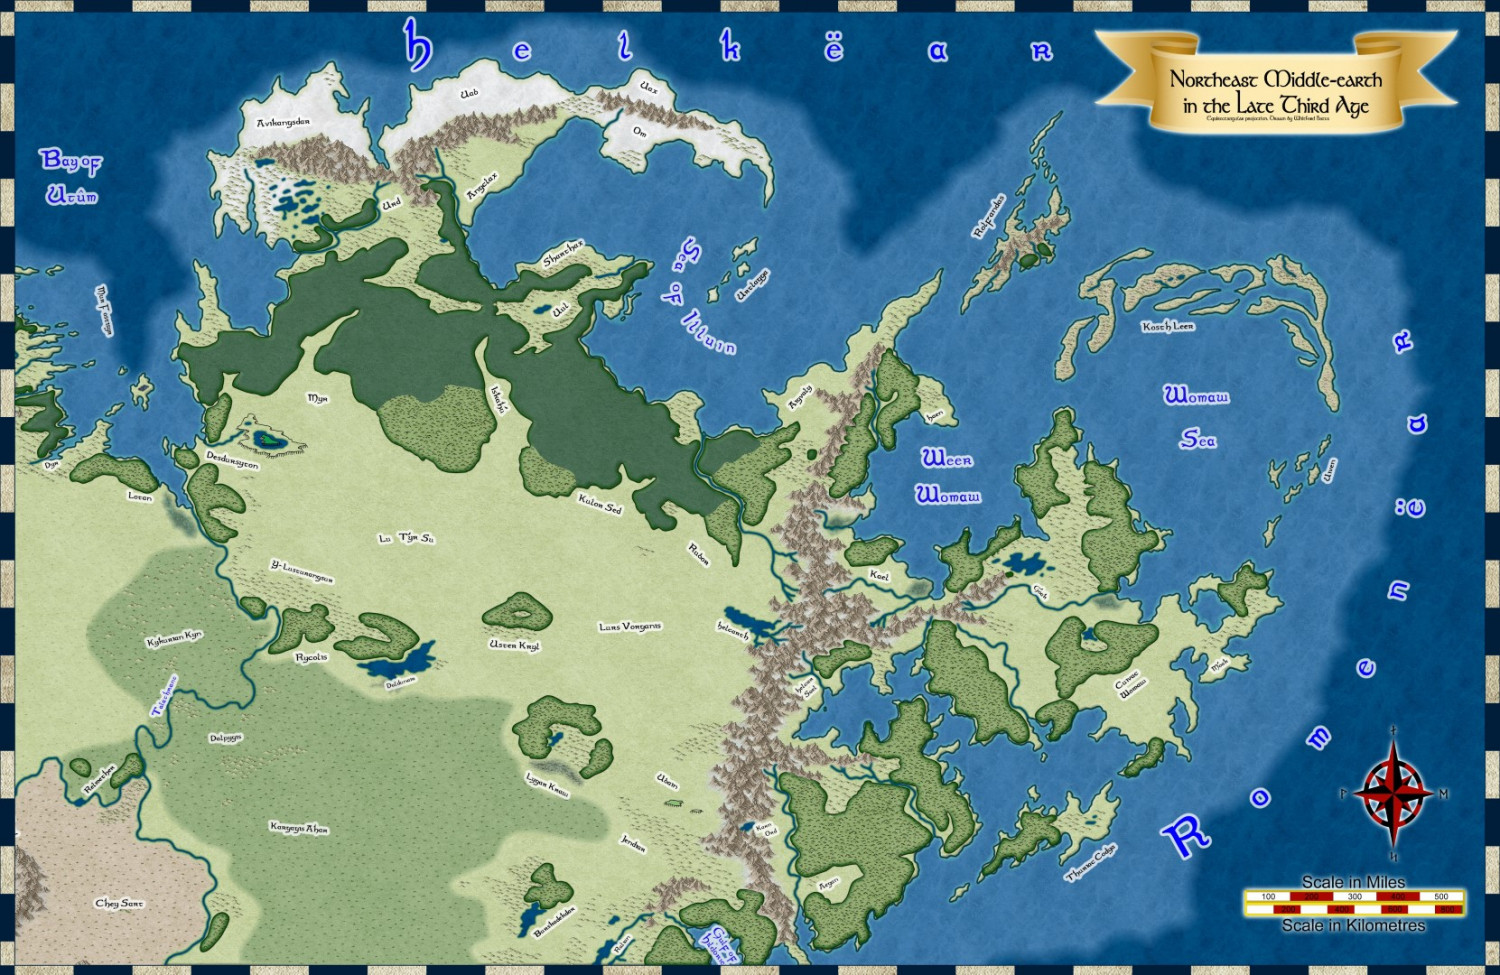 ICE M-E NE (late Third Age) (ancient realms) v1.0wip (Large).JPG